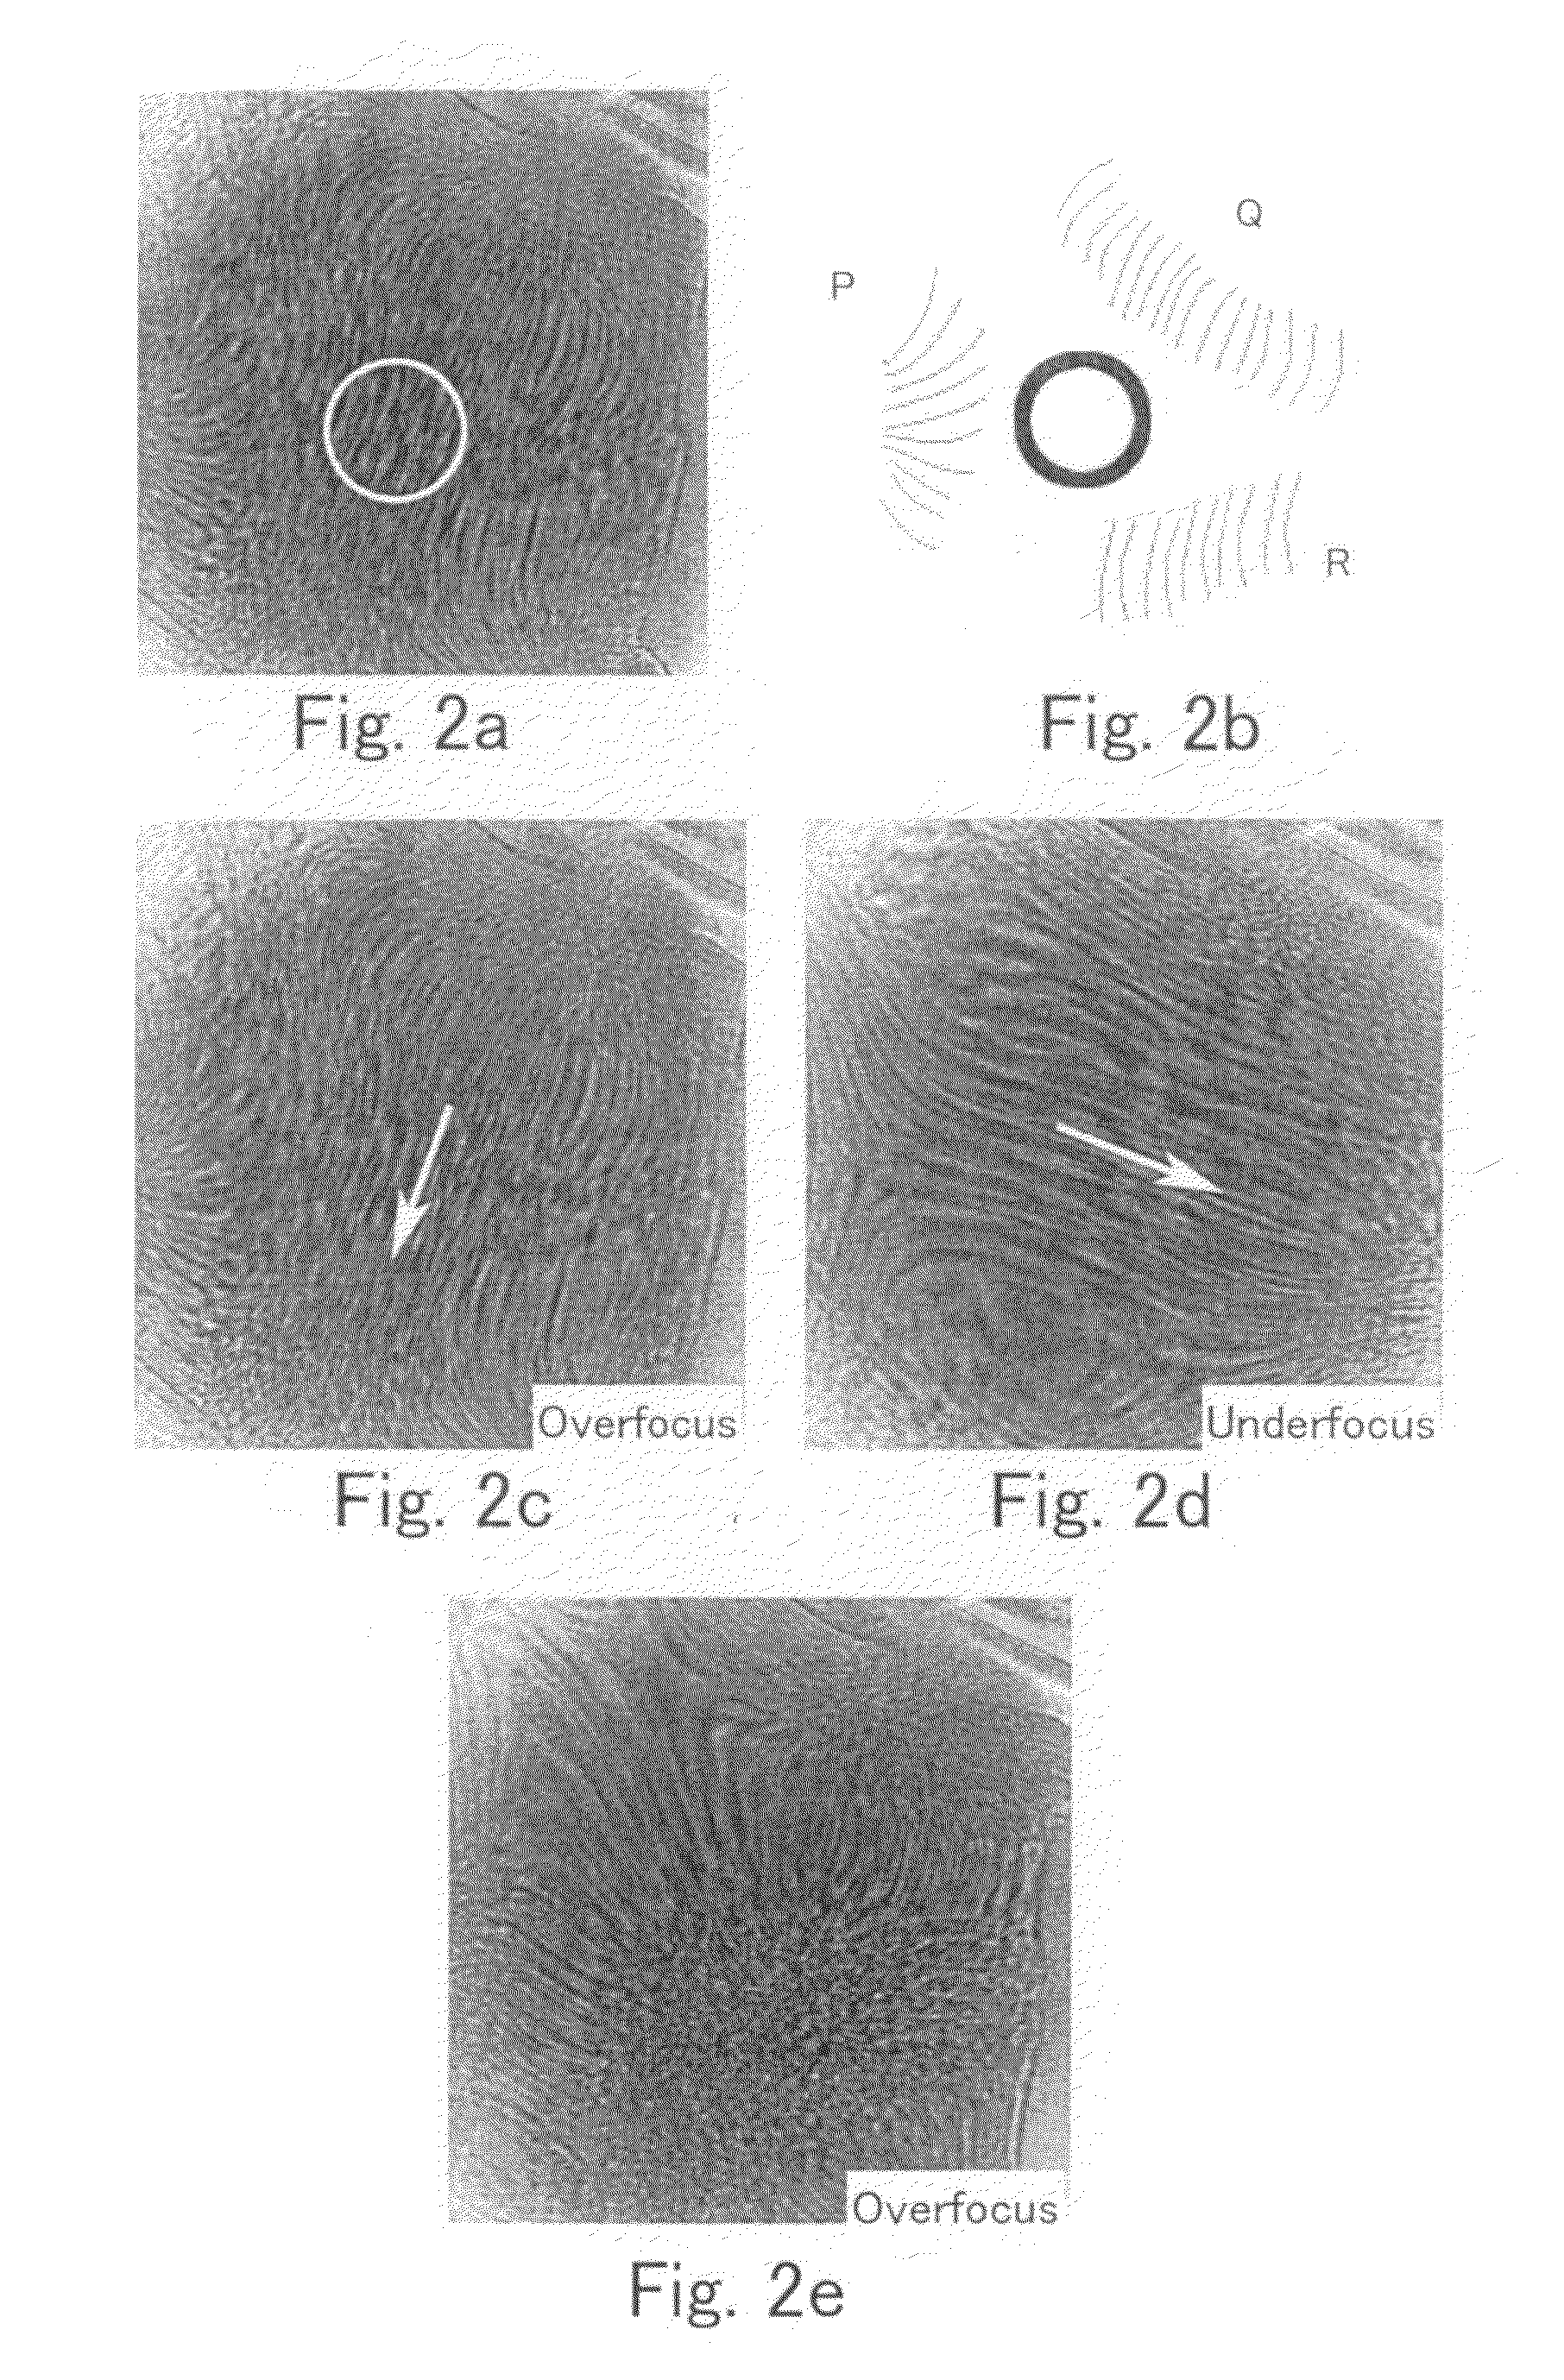 Method of measuring aberrations and correcting aberrations using Ronchigram and electron microscope